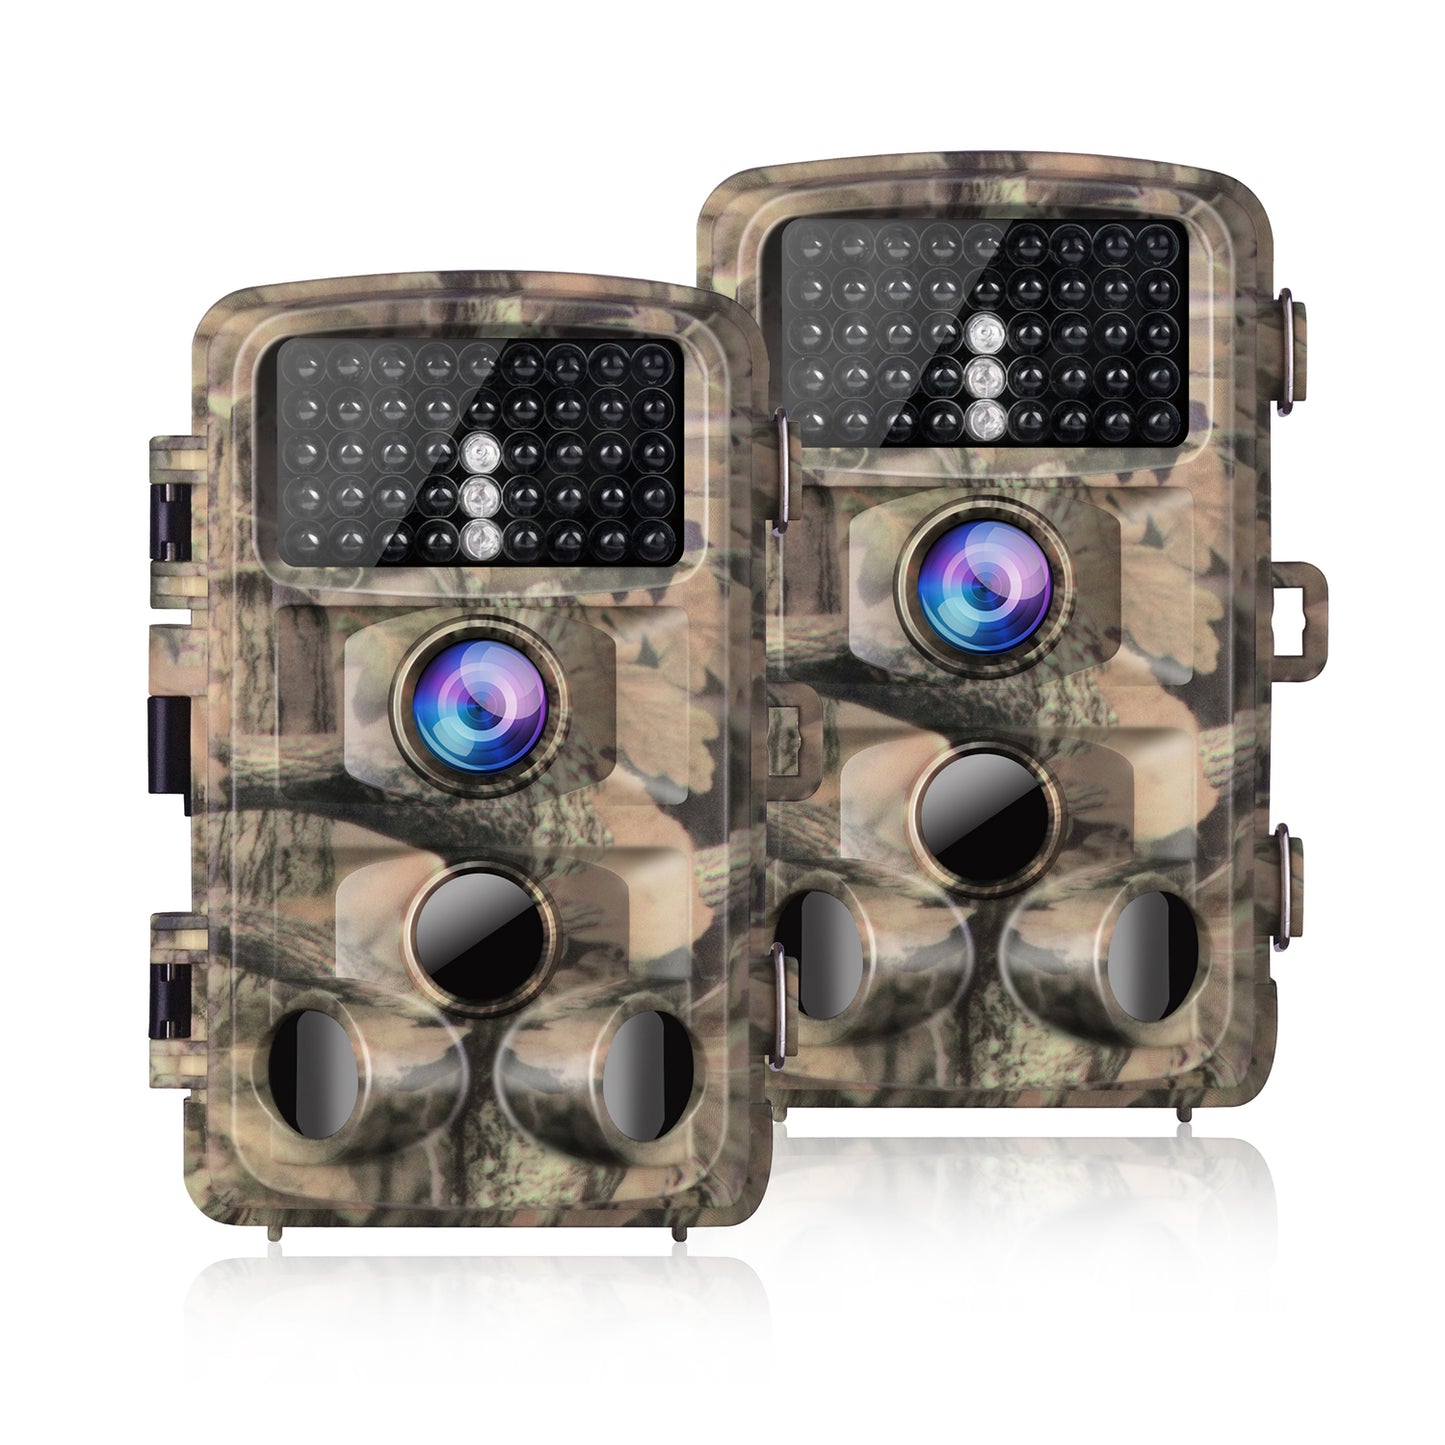 CAMPARK 2 PACK T45 Trail Camera 20MP 1080P Deer Hunting Game Cam with 2.4"LCD ,3PIR 120° Wide-Angle, Night Vision ,IP56 Waterproof ,850nm LEDs Wildlife Monitoring